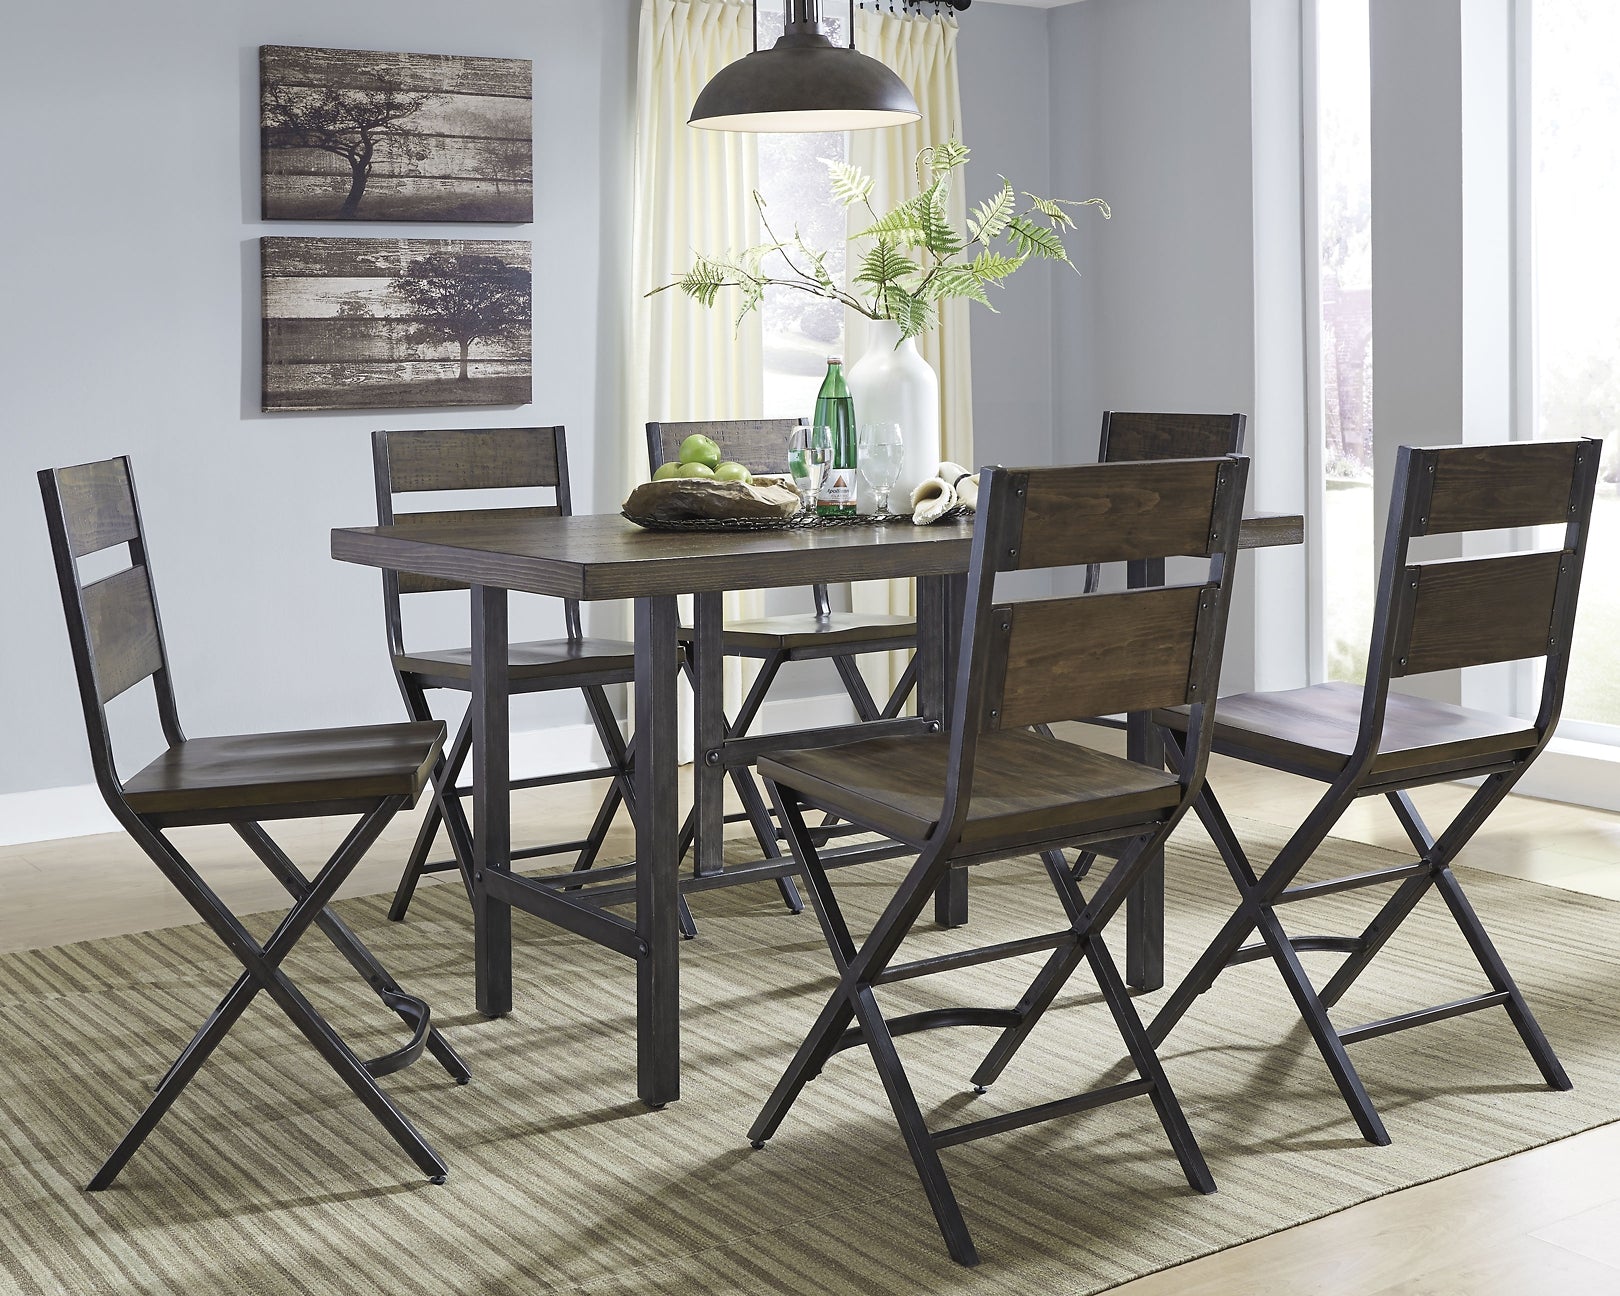 Kavara Counter Height Dining Table and 6 Barstools at Walker Mattress and Furniture Locations in Cedar Park and Belton TX.